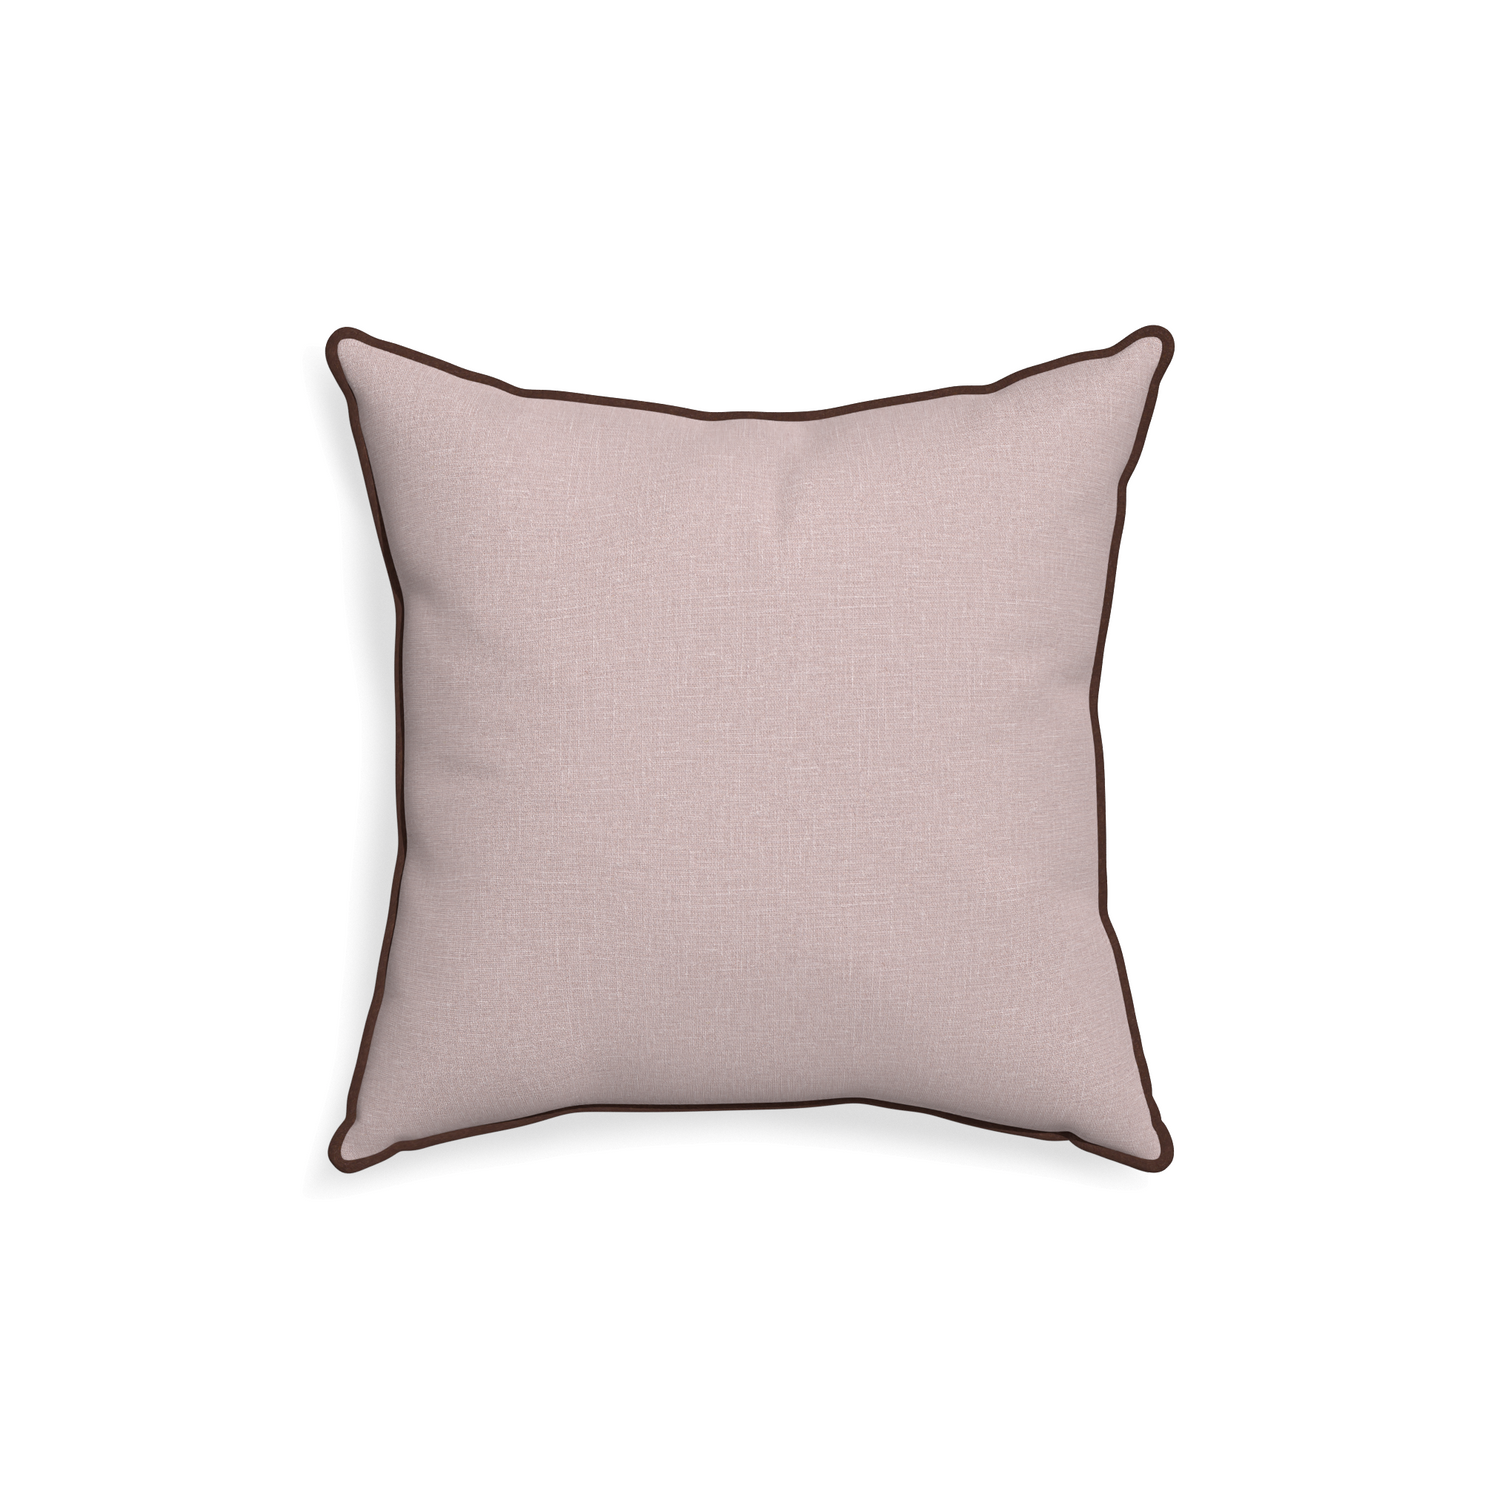 18-square orchid custom mauve pinkpillow with w piping on white background